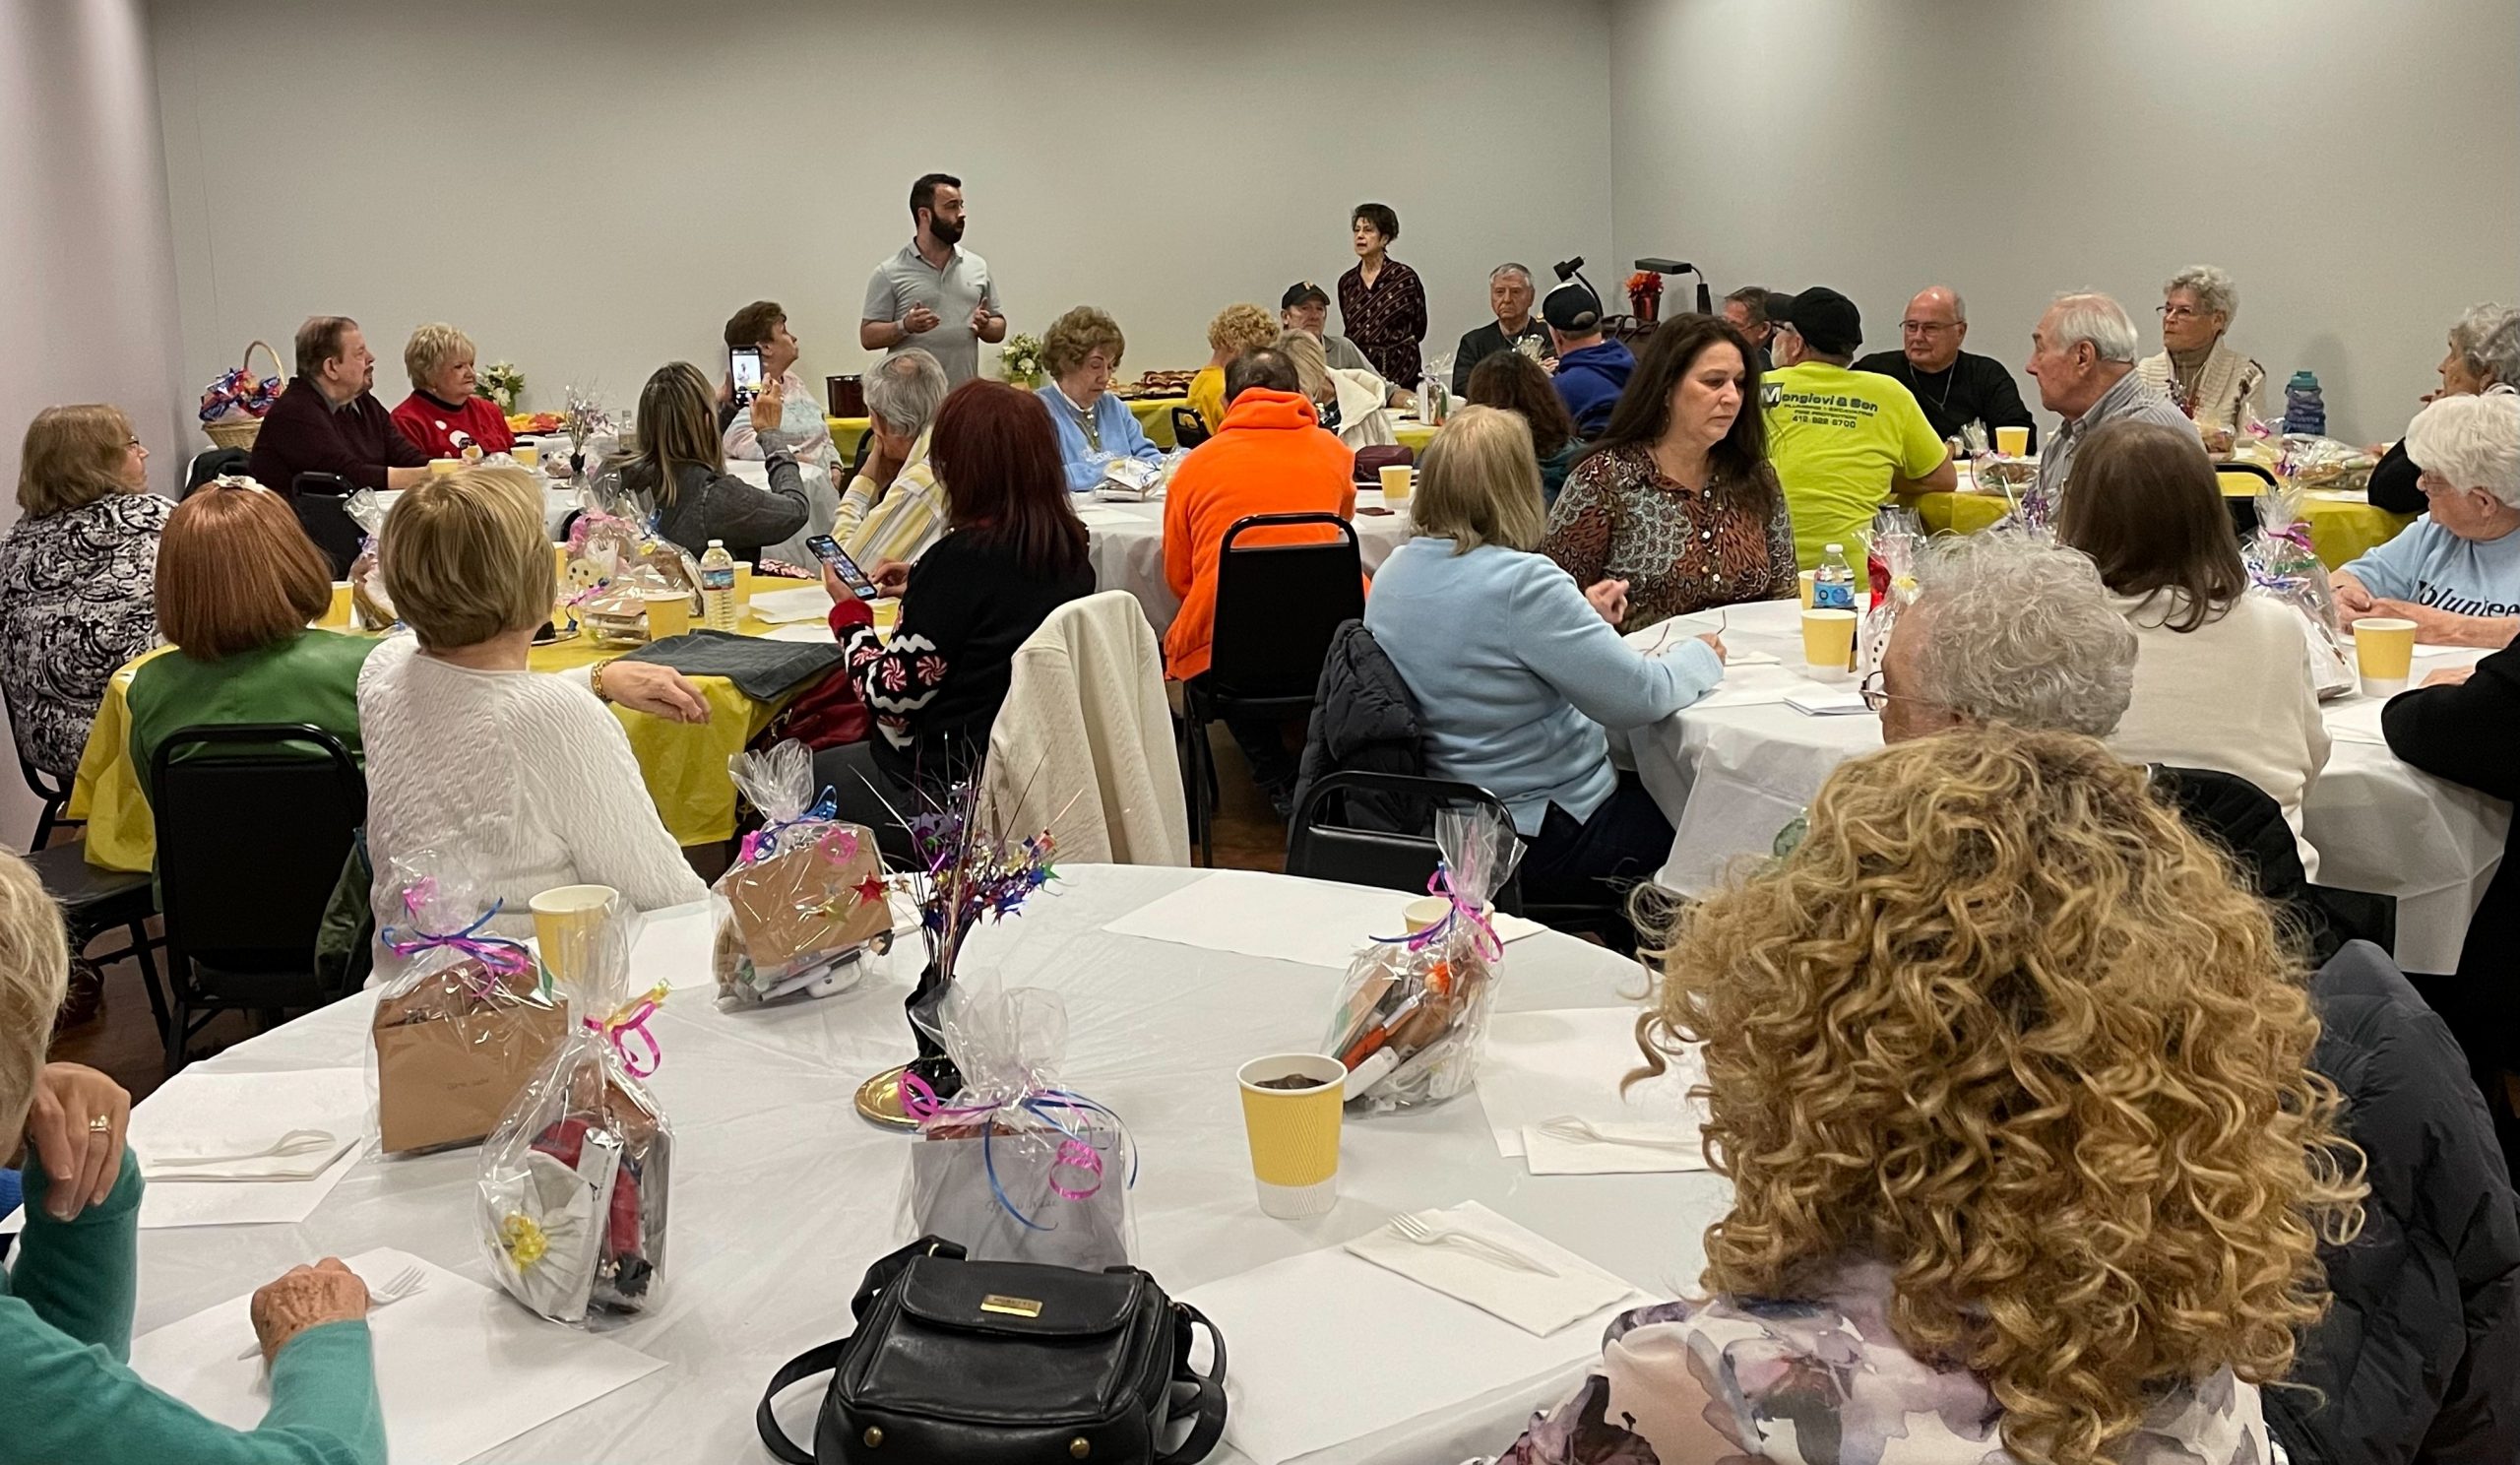 The Center at the Mall recently held a luncheon honoring the contributions of 61 volunteers at the center over this past year.